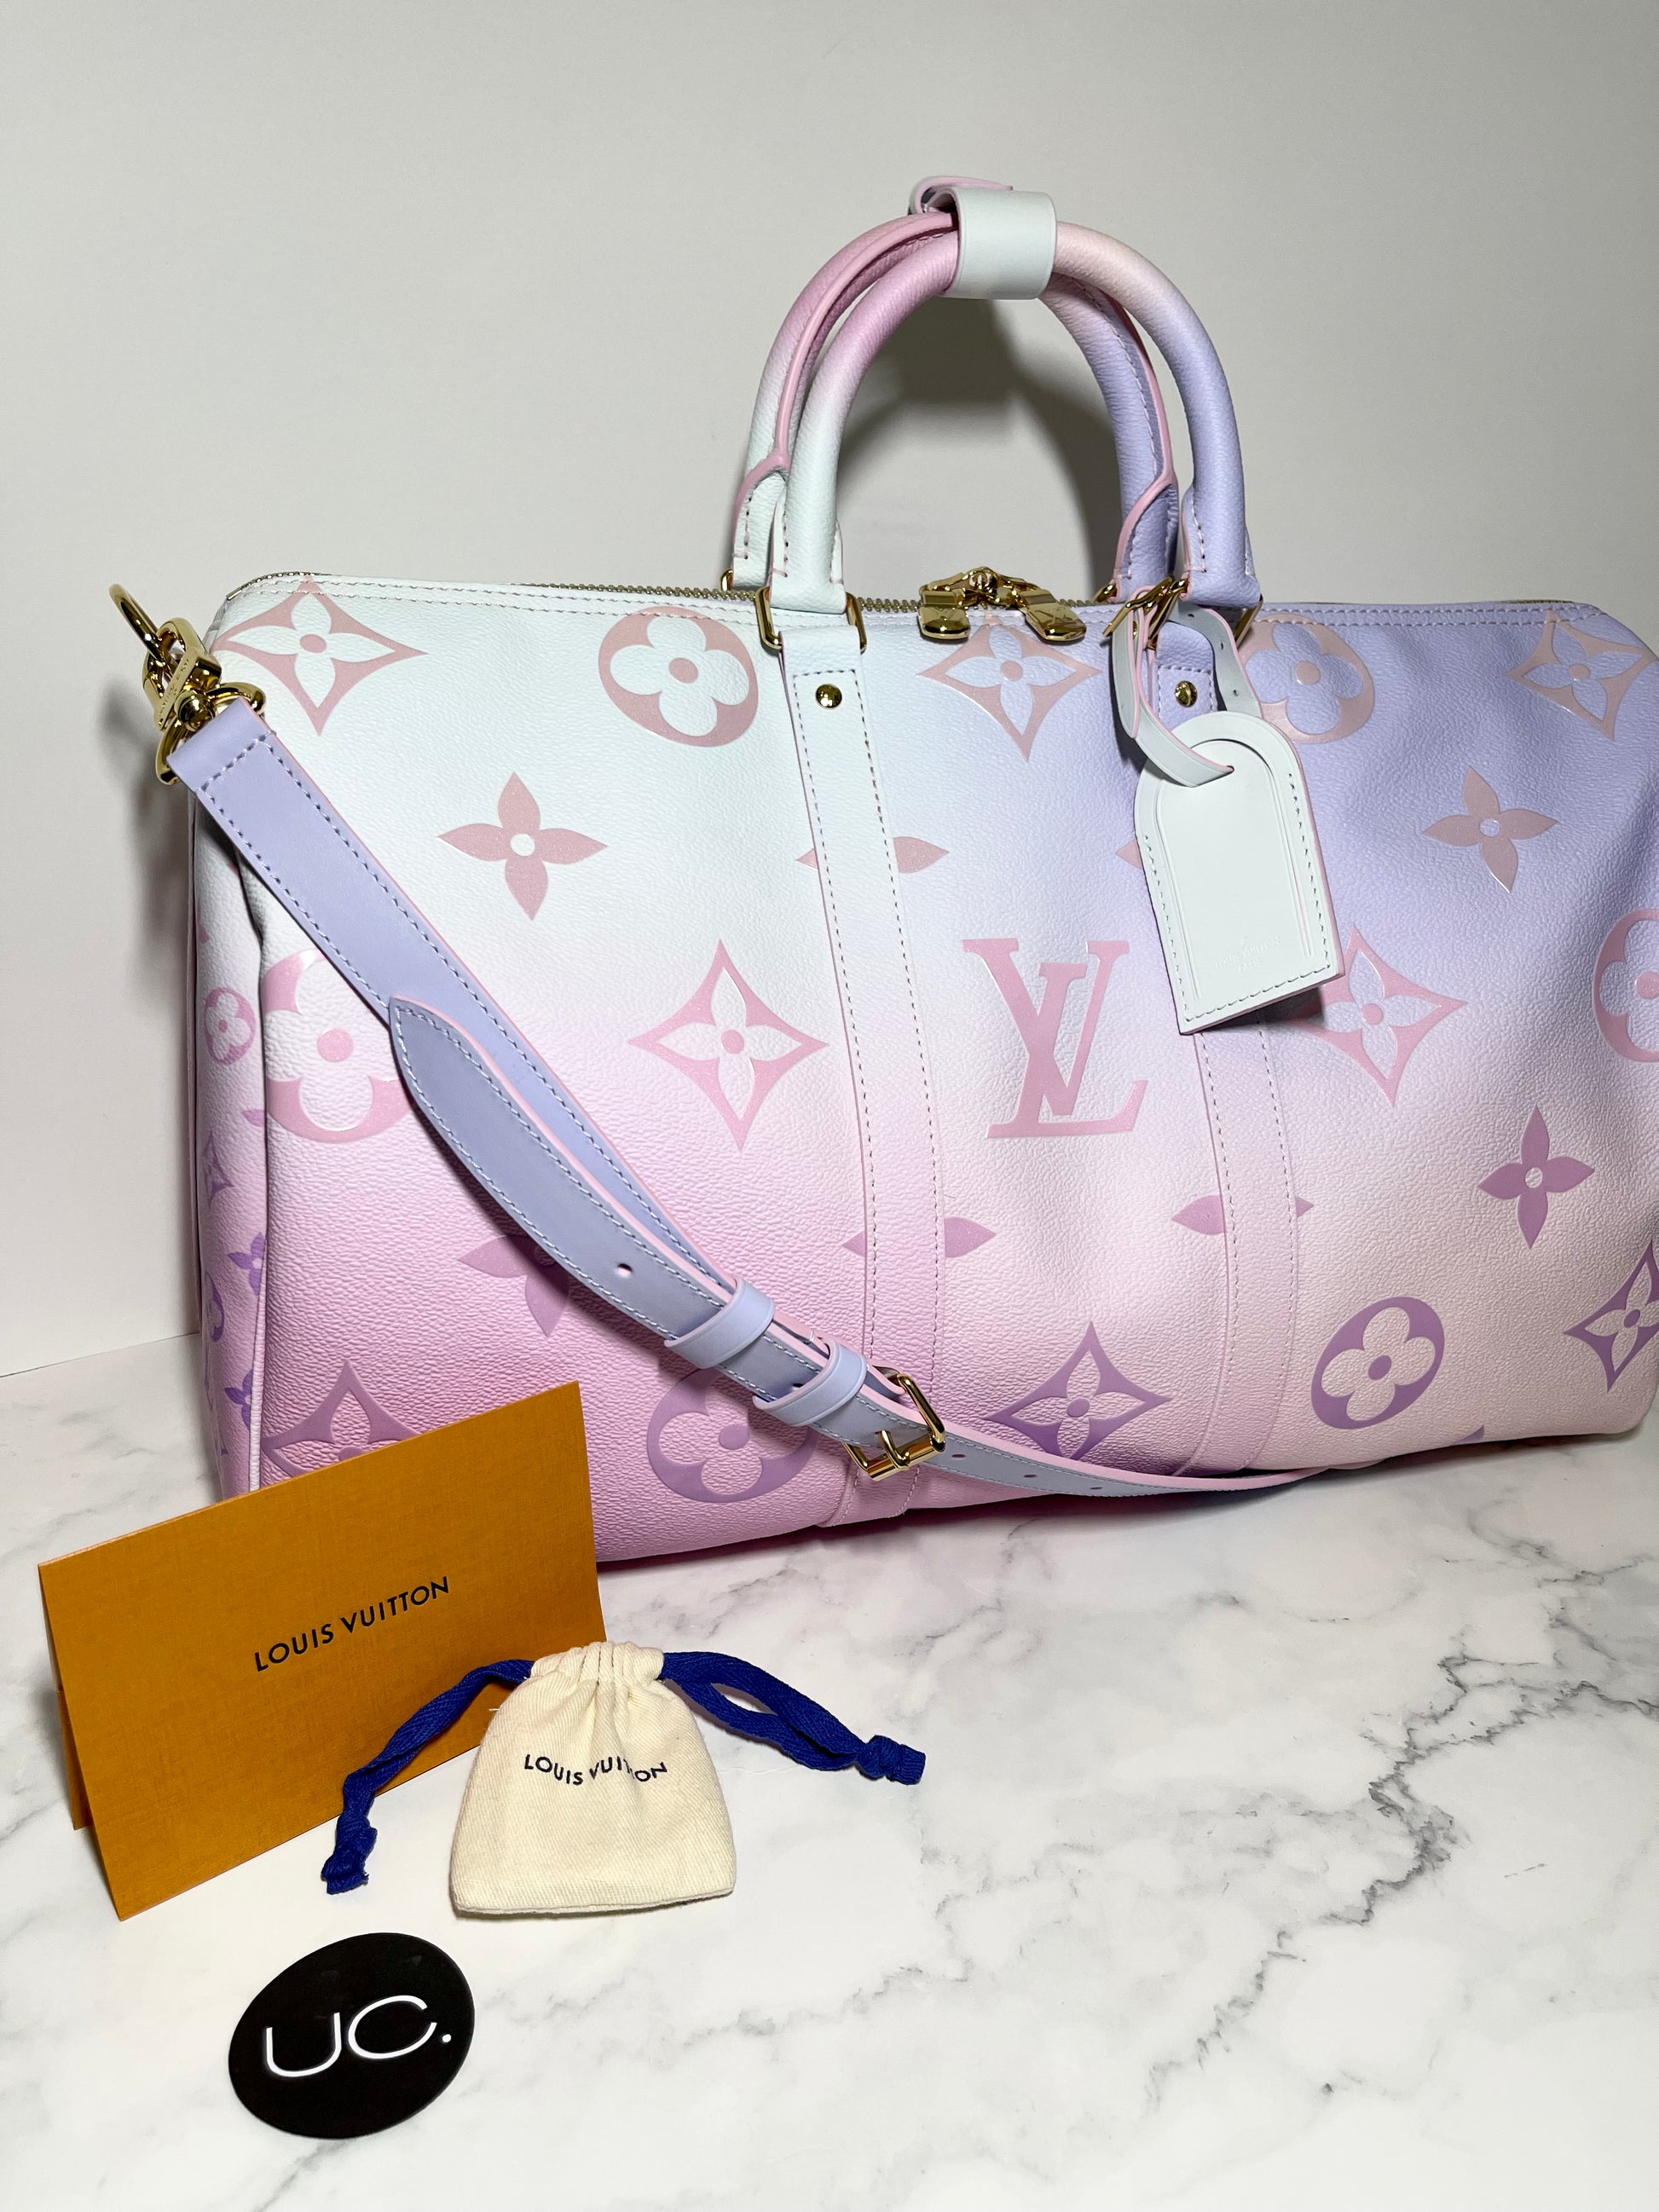 Welcome home to my new sunrise pastel keepall 45 from the Spring in the City  collection! I think this may be my favorite bag from the whole collection!  (And this is my